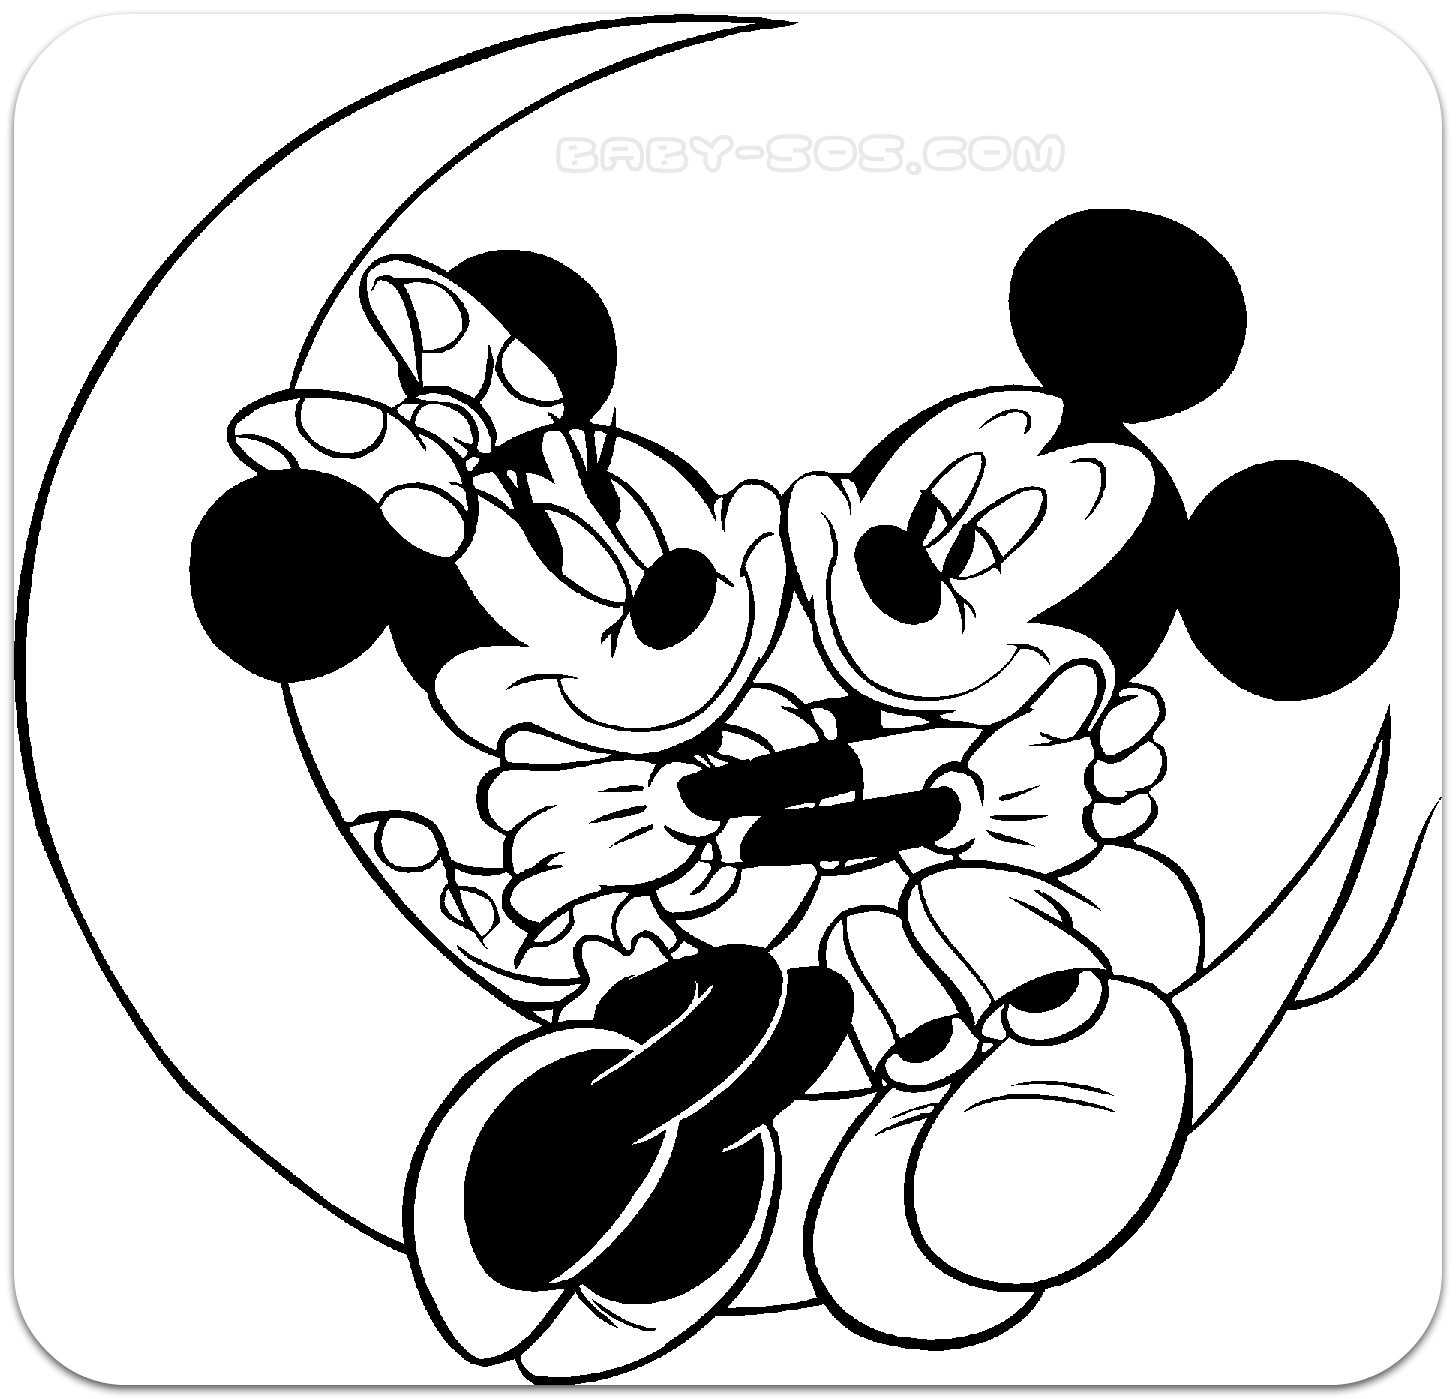 Coloring for kids, Disney, Mickey Mouse, Maysa mine, guffі, coloring